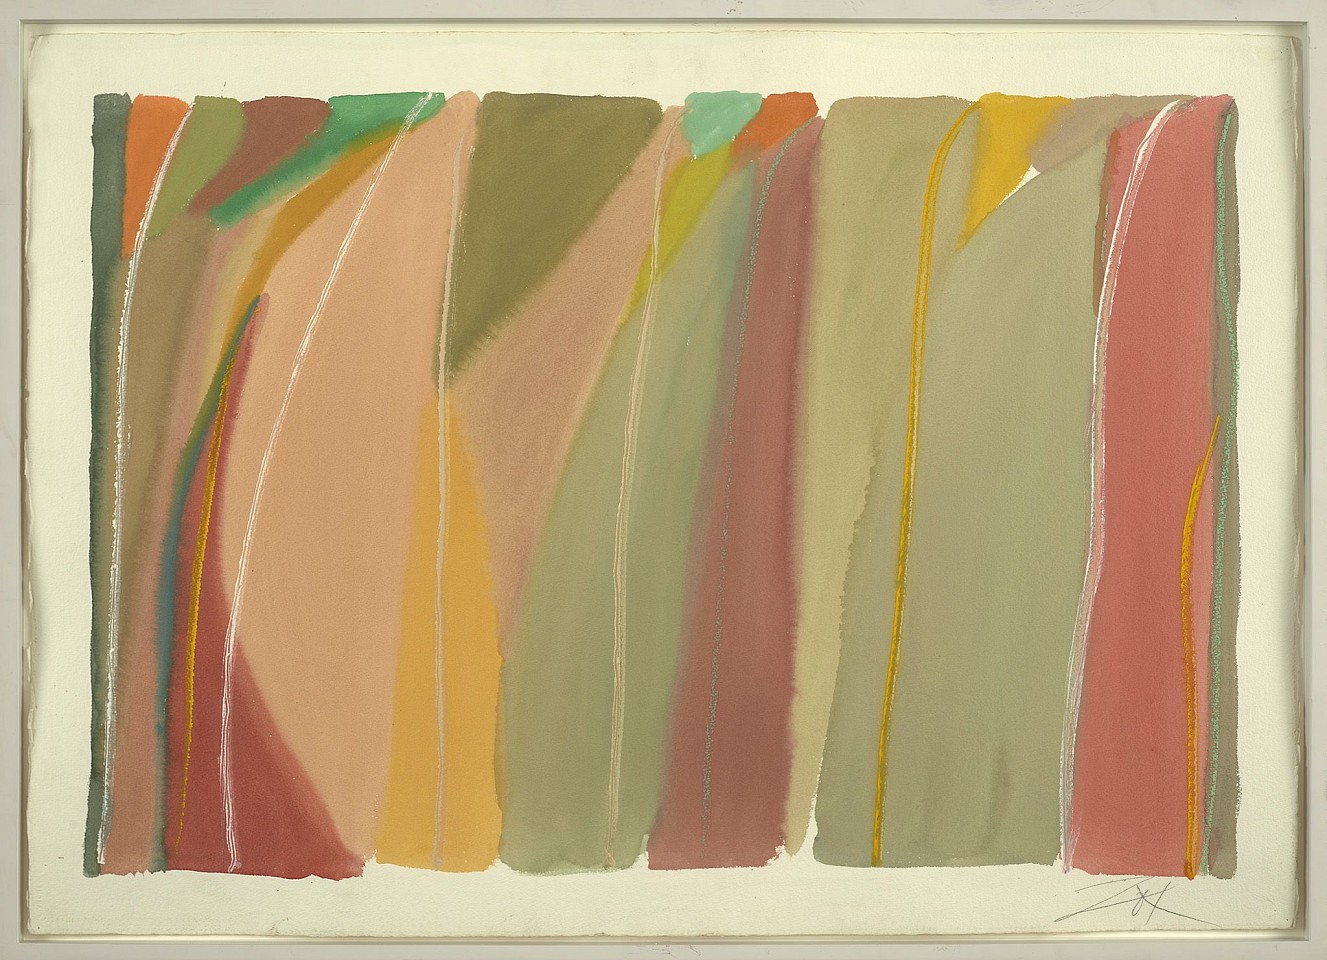 Larry Zox, Untitled, 2000
Acrylic on paper, 29 x 41 in. (73.7 x 104.1 cm)
ZOX-00022